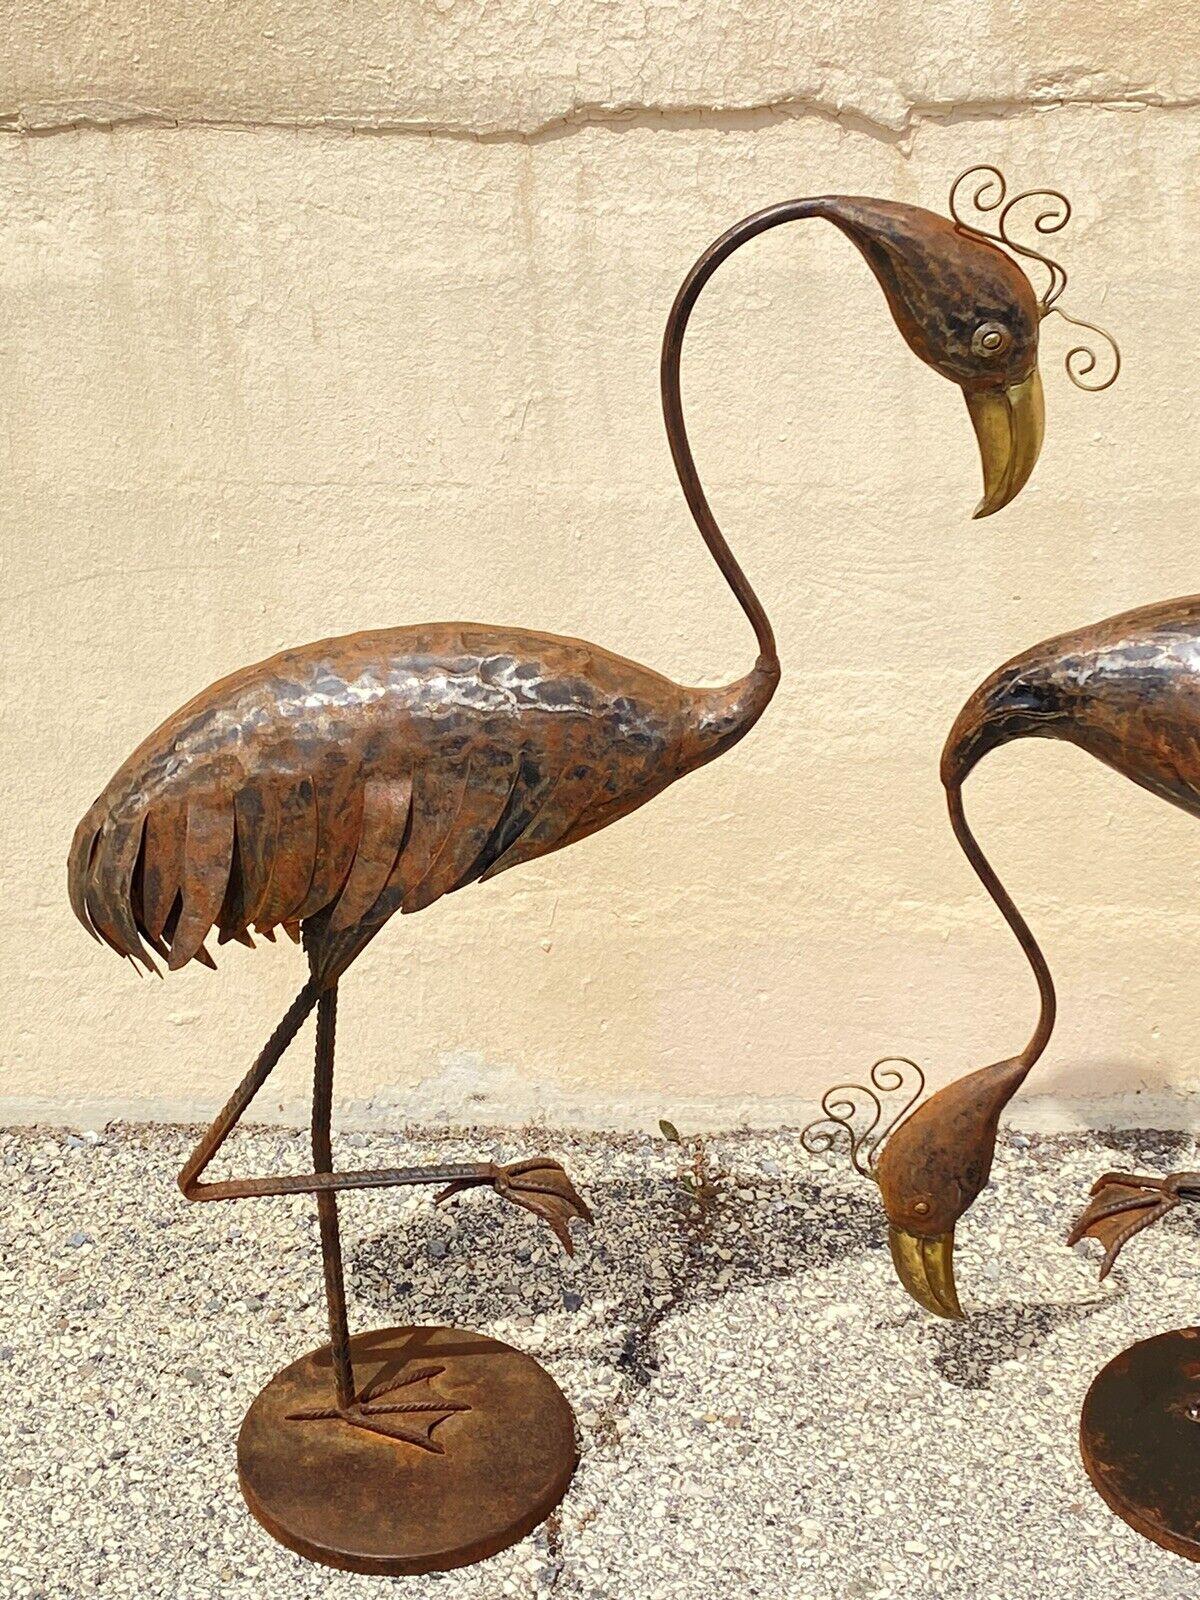 Decorator Steel Metal Heron Bird Flamingo Garden Sculpture Statue - a Pair. Item features 2 statues included (as pictured), attractive weathered rustic finish, great style and form. circa late 20th - 21st century.
Measurements: 
39